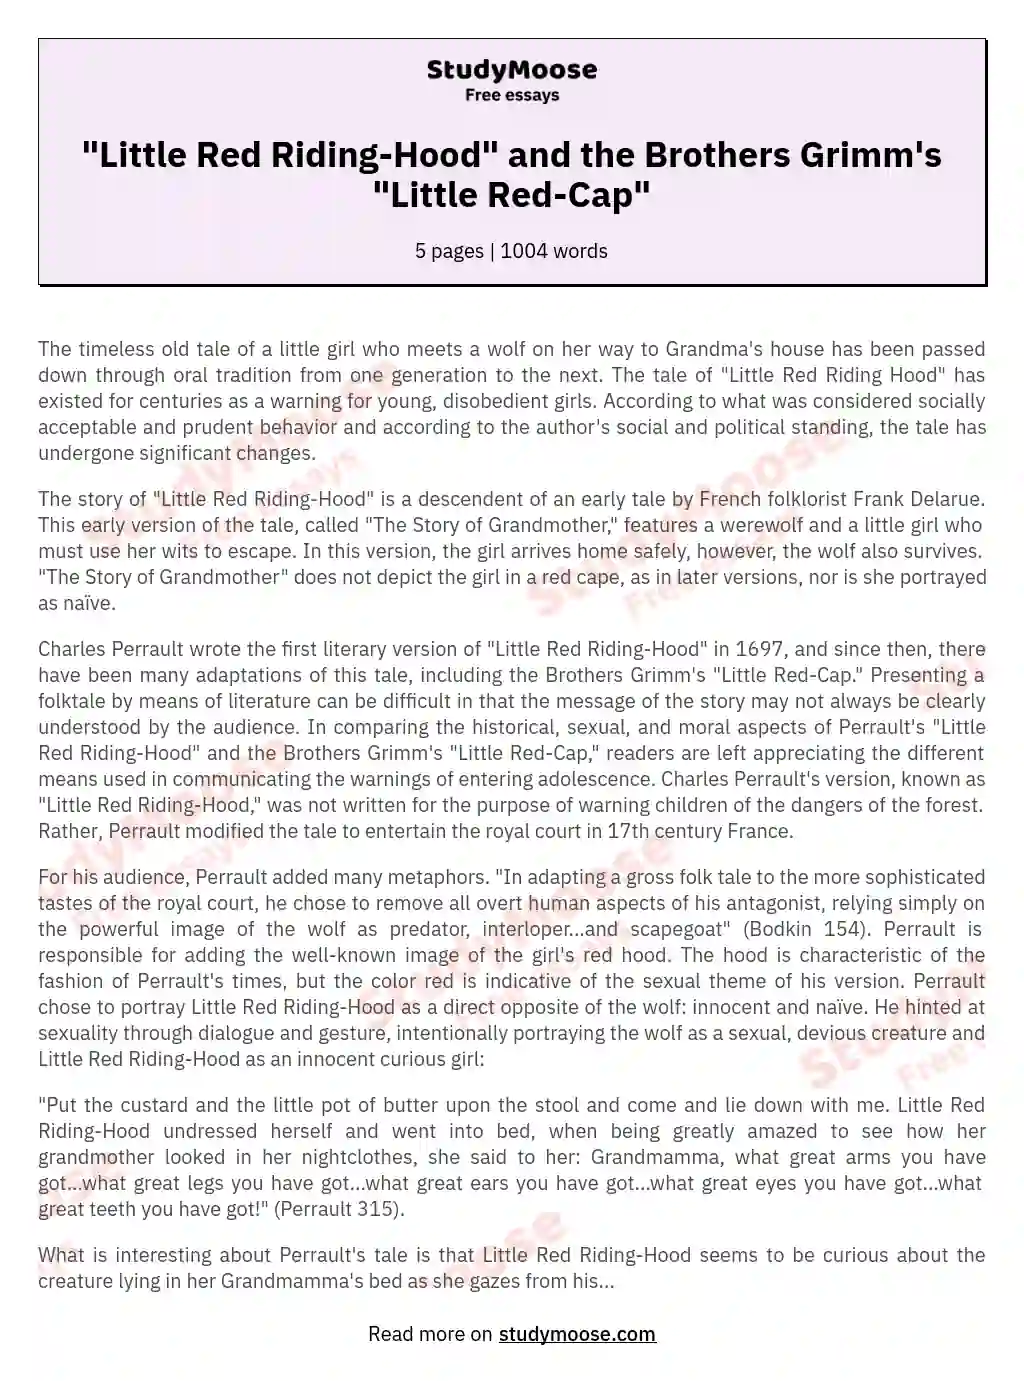 "Little Red Riding-Hood" and the Brothers Grimm's "Little Red-Cap"